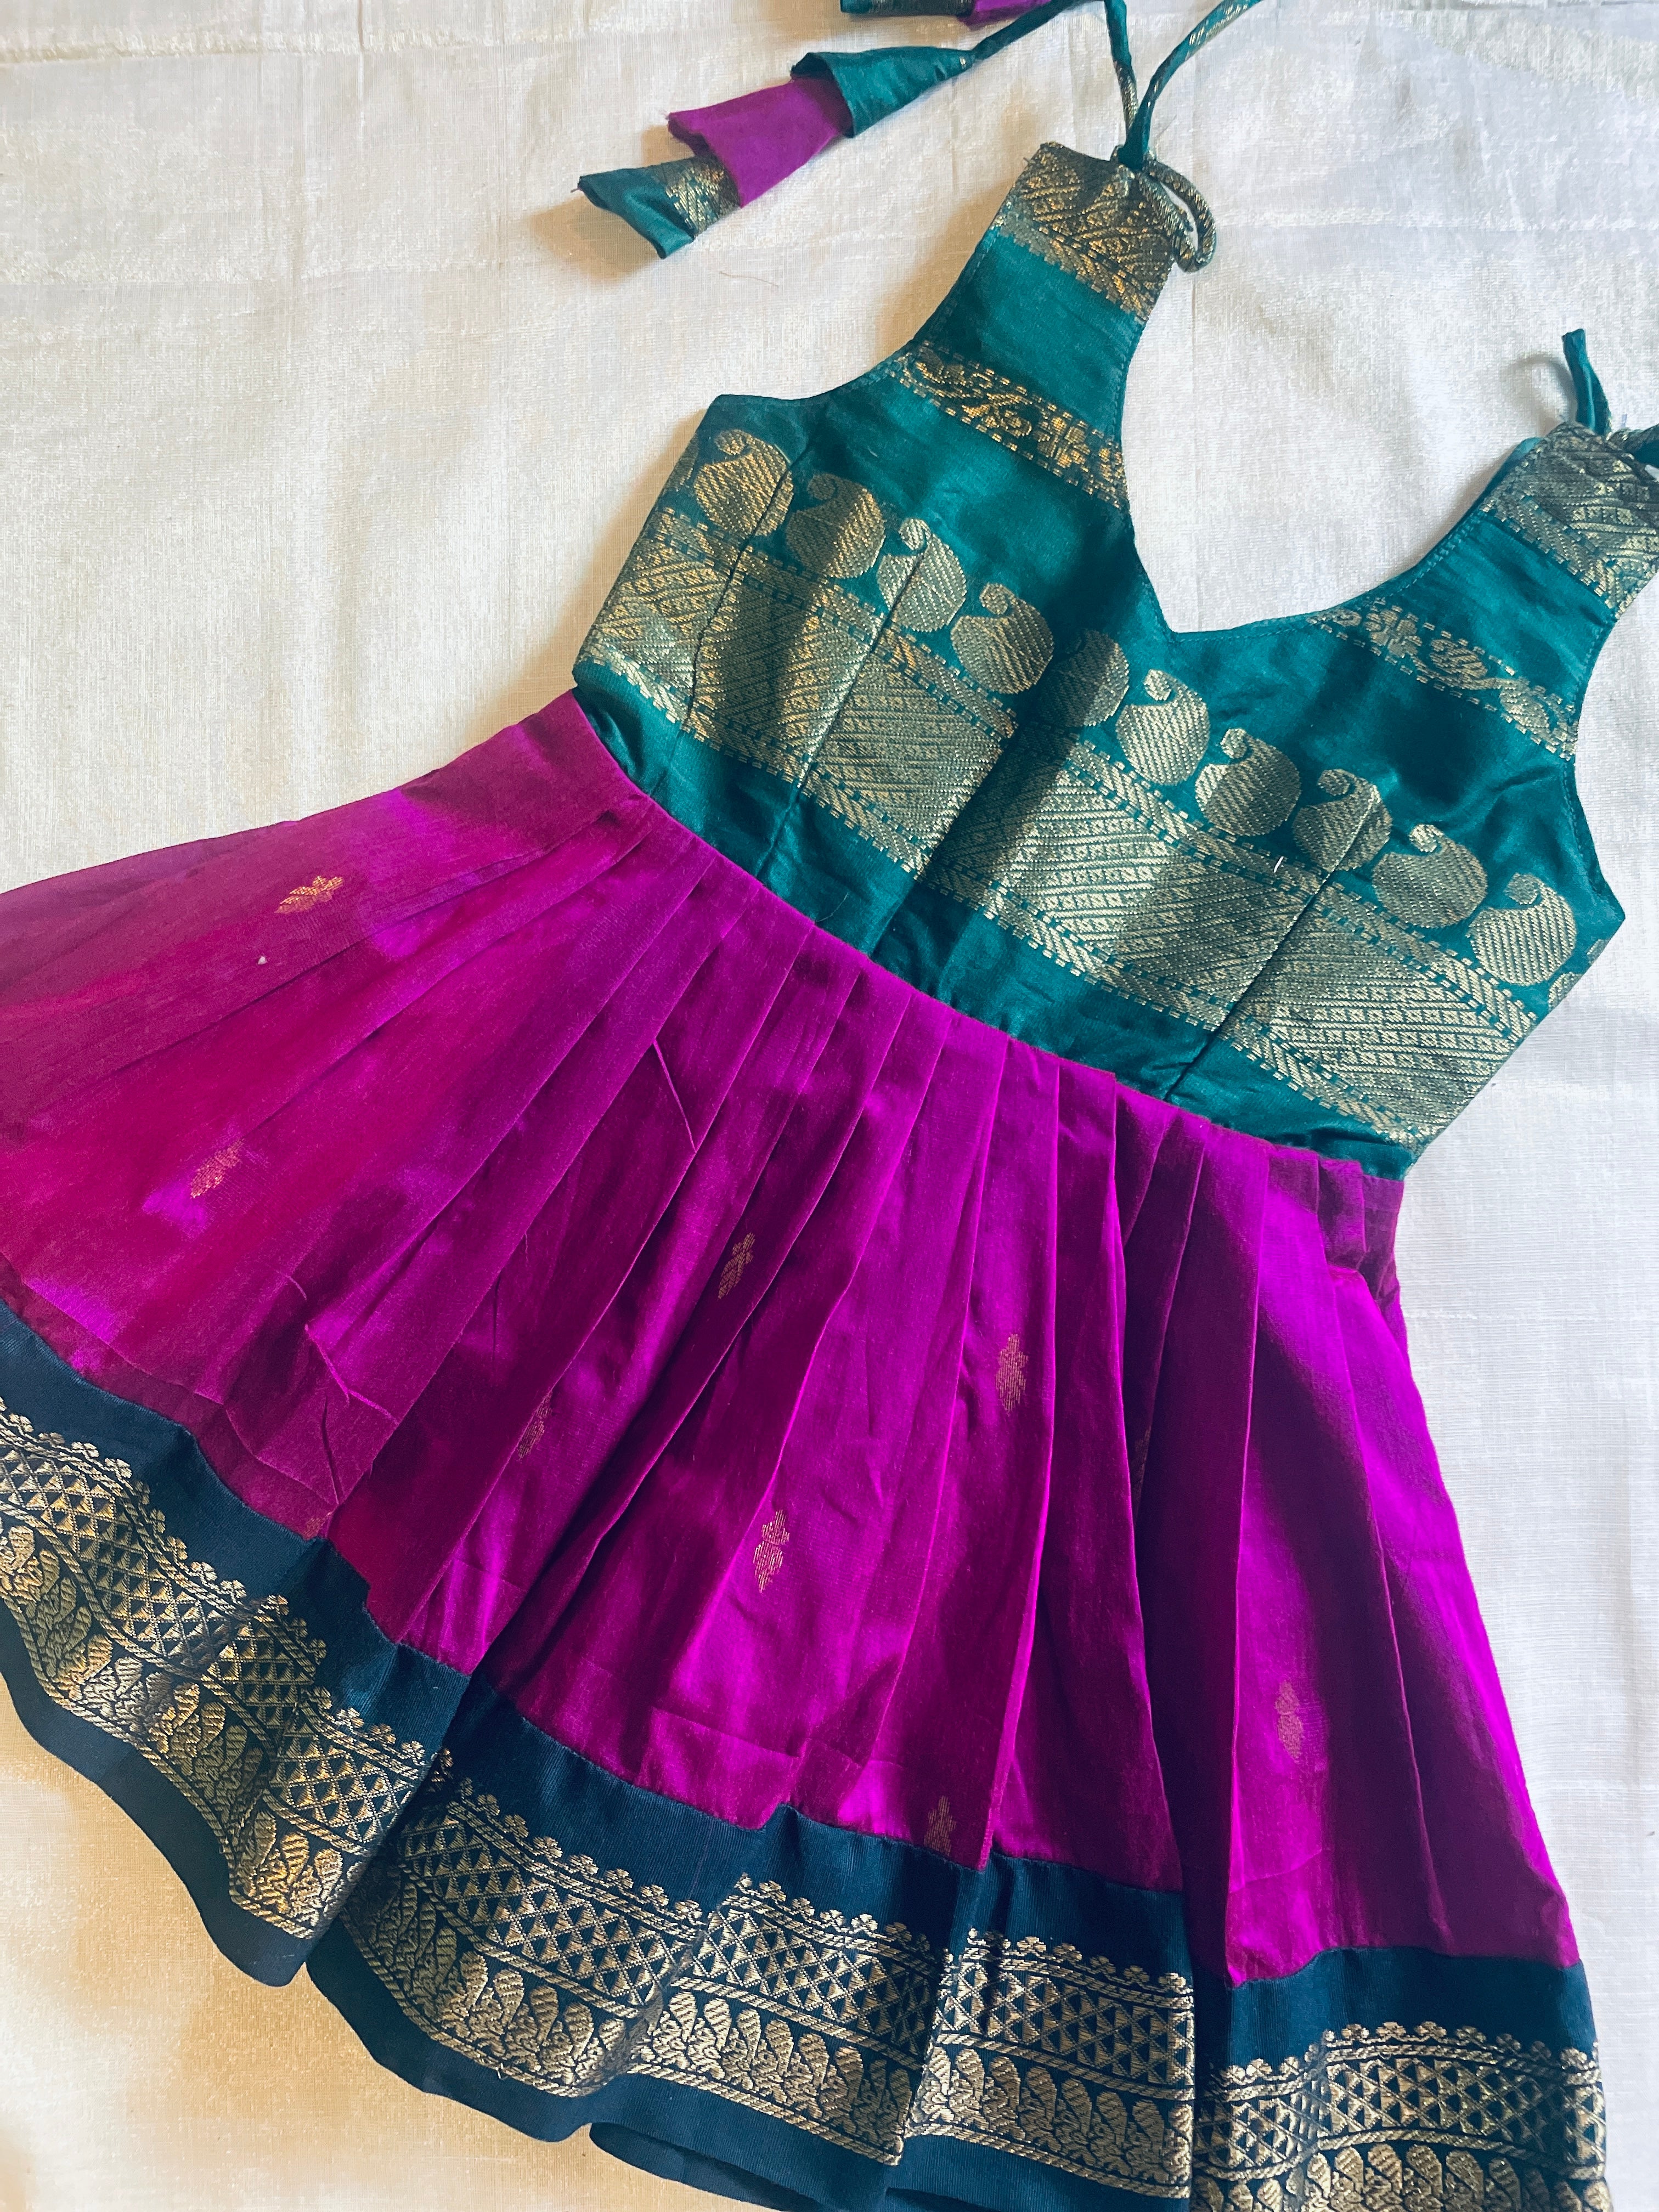 Pin by Sujatha Poojary on Kids dress patterns | Traditional baby dresses,  Kids party wear dresses, Baby girl dresses diy